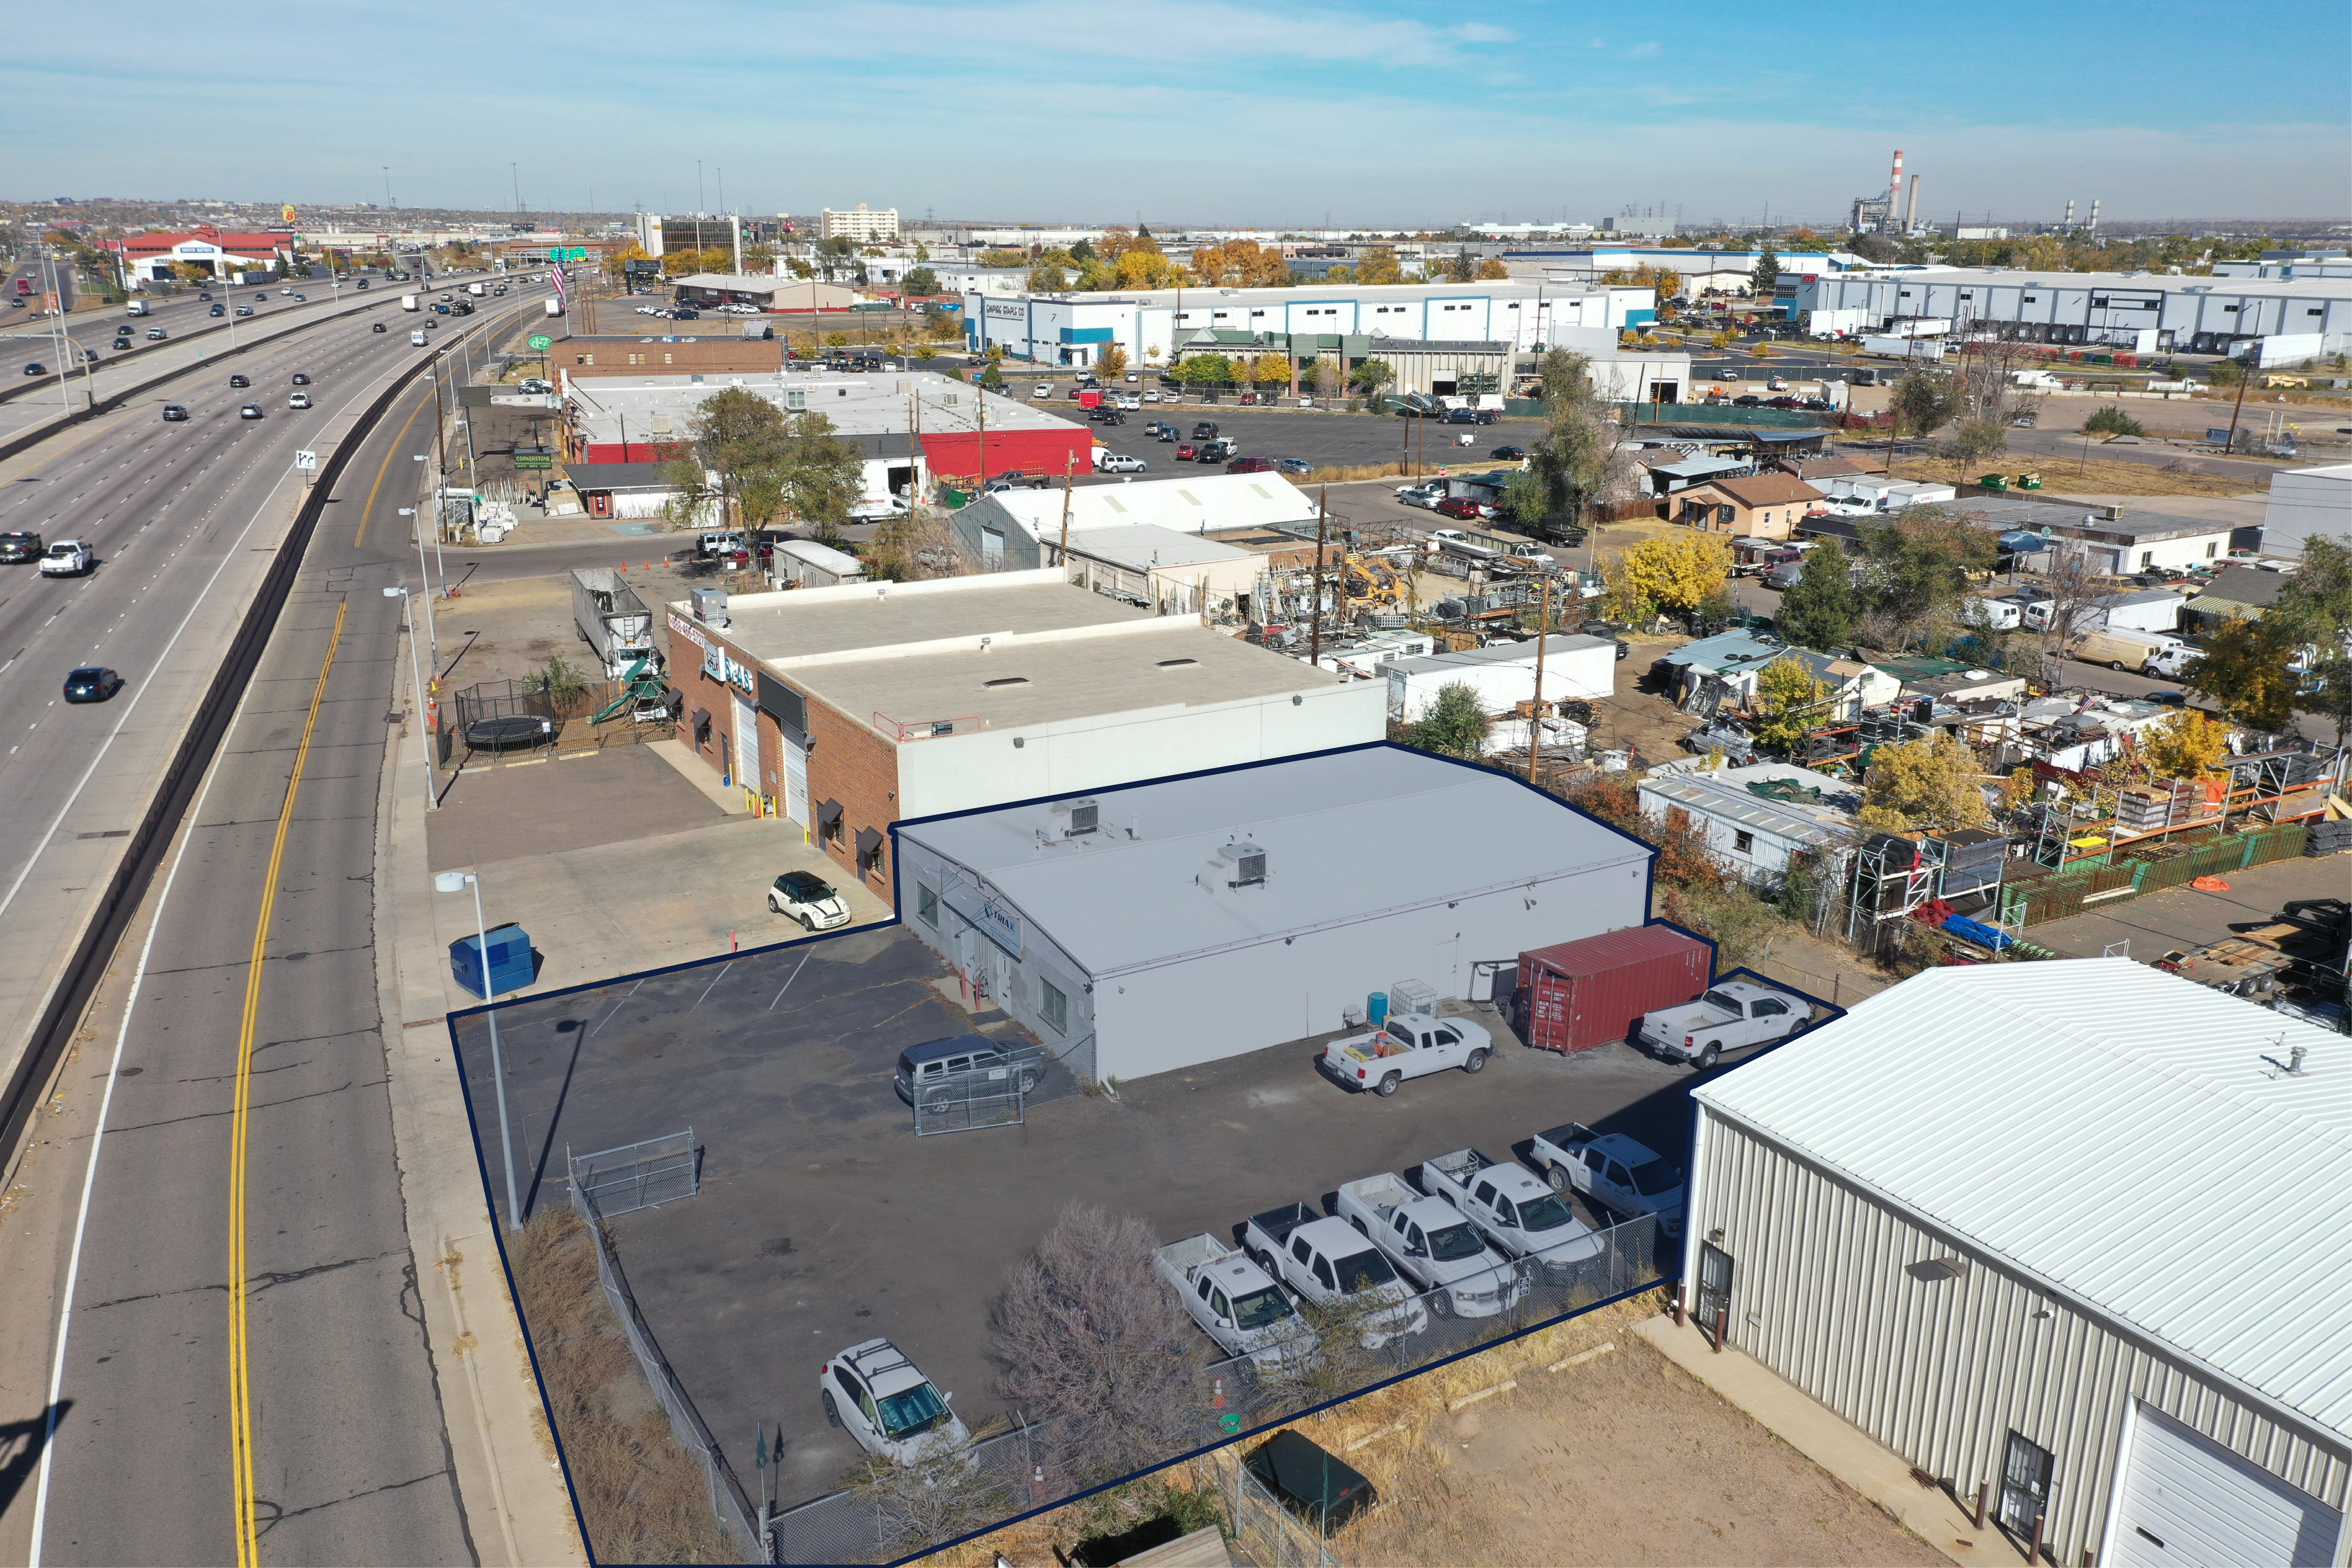 Two-Unit Industrial Building at 5350 Broadway in Denver, CO Sells for $1,300,000